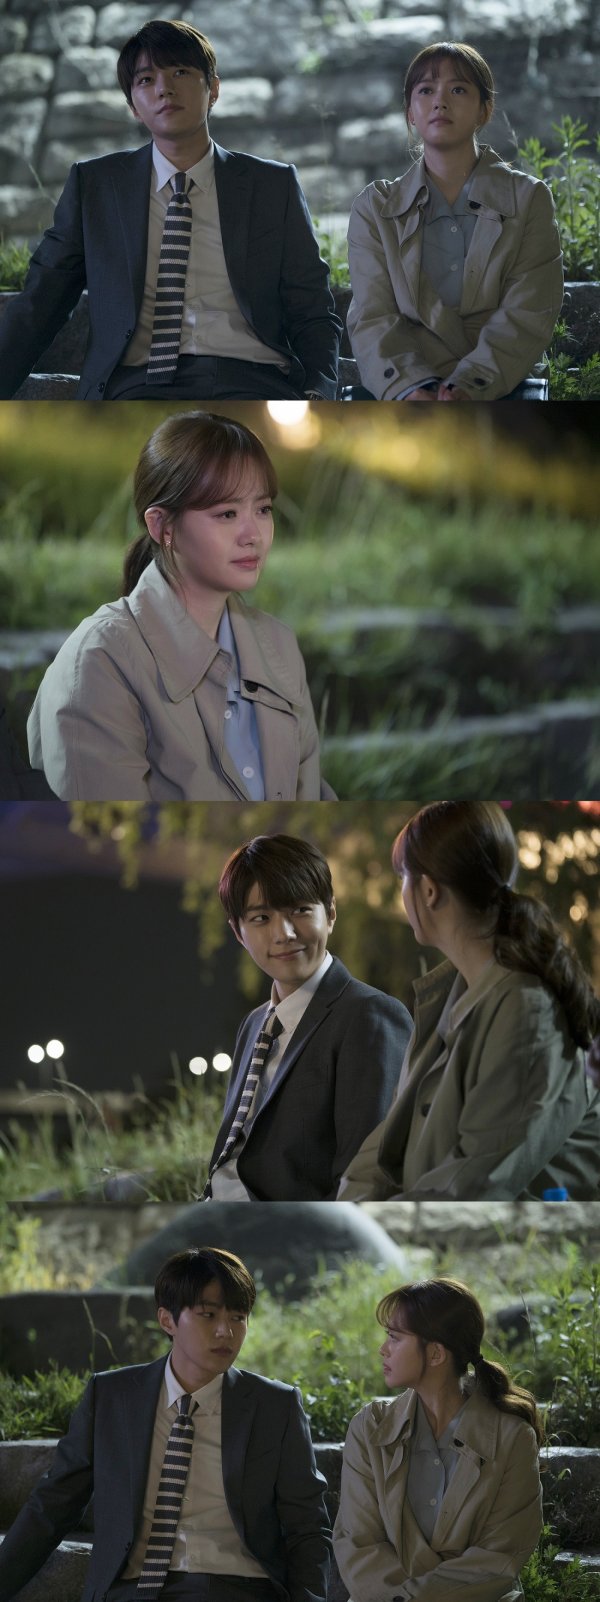 JTBCs monthly drama Miss Hammurabi (director Kwak Jung-hwan, playwright Moon Yoo-seok, production studio and new) captures the moon-night meeting between Mark Ormrod (Go Ah-ra) and Imbarn (Myoeng-su Kim), which hit the wall of reality on the 23rd, and stimulates curiosity.In the last broadcast, Mark Ormrod accused Sensim Woo (played by Jeon Jin-gi), who had been asking for a trial without boundaries with his friendship.Mark Ormrods move, which speaks out for justice at every moment, is a major wave of repercussions for a court with a rigid organizational culture.Mark Ormrod faced cold cynicism and criticism from fellow judges as the issue of the chief judge of the success story (Cha Soon-bae) continued to be raised to the accusation of emotional right.But there was always an improv by the side of Mark Ormrod left alone.In the meantime, Mark Ormrod and Imbarnes picturesque visuals, which are out of the courthouse in the public photos and receive romantic moonlight side by side, stimulate excitement and sweetness.The ever-bright and positive Mark Ormrod creates a neat atmosphere with a moist, emotional look.The Imbarne dimples towards the Mark Ormrod sniper the shiver.Looking at the sky, the eyes that are drawn toward each other contain trust and will, which makes them wonder about their relationship.Even after Imbarns confession of stone fastballs, there are still tensions and excitement, and they are becoming inseparable, relying on each other, respecting each other, and providing the power of growth.Whenever Mark Ormrod caused a stir in the courthouse, Imbarn also kept silently next to him and went on to change.In the 10th episode to be broadcast on the 25th, Mark Ormrod, who became The Whistleblower, faces cold cynicism, feels skeptical about unreasonable reality, and faces a crisis.It is also a crucial point of observation about how the relationship with Imbarn, who keeps the side of Mark Ormrod, will change.Meanwhile, the 10th episode of Miss Hammurabi, which will feature Mark Ormrod facing the high wall of reality through the lawsuit to confirm the invalidation of the Whistleblower unfair dismissal, will be broadcast on JTBC at 11 pm on the 25th.Photos: Studio and New